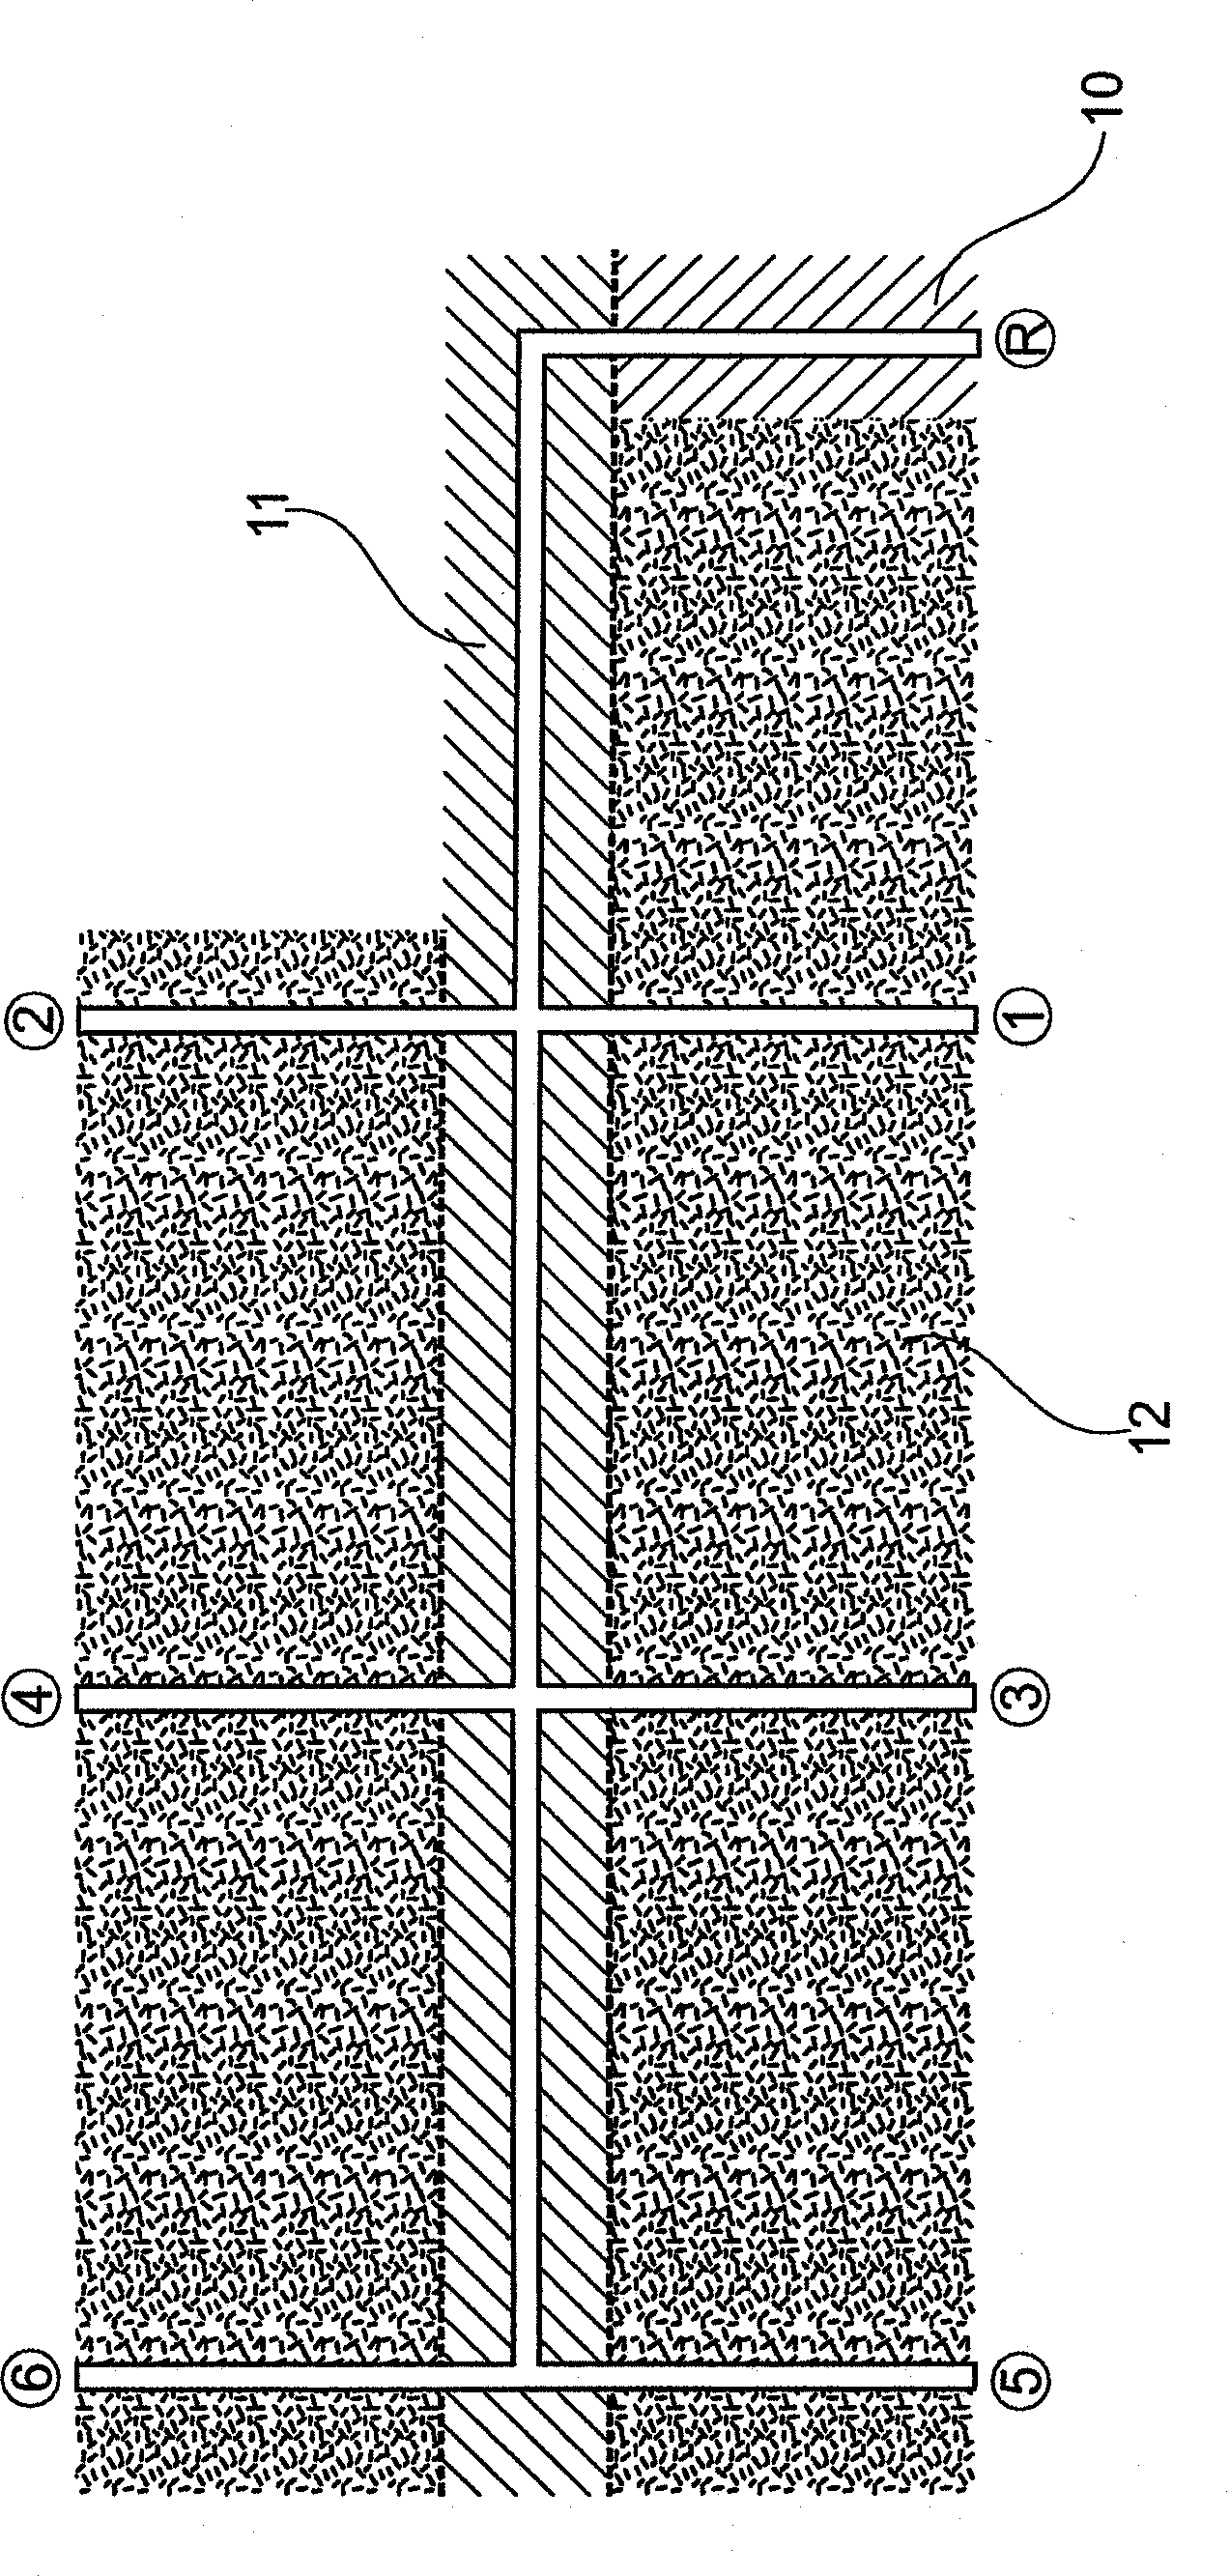 Method for detecting the position of a mobile switching element